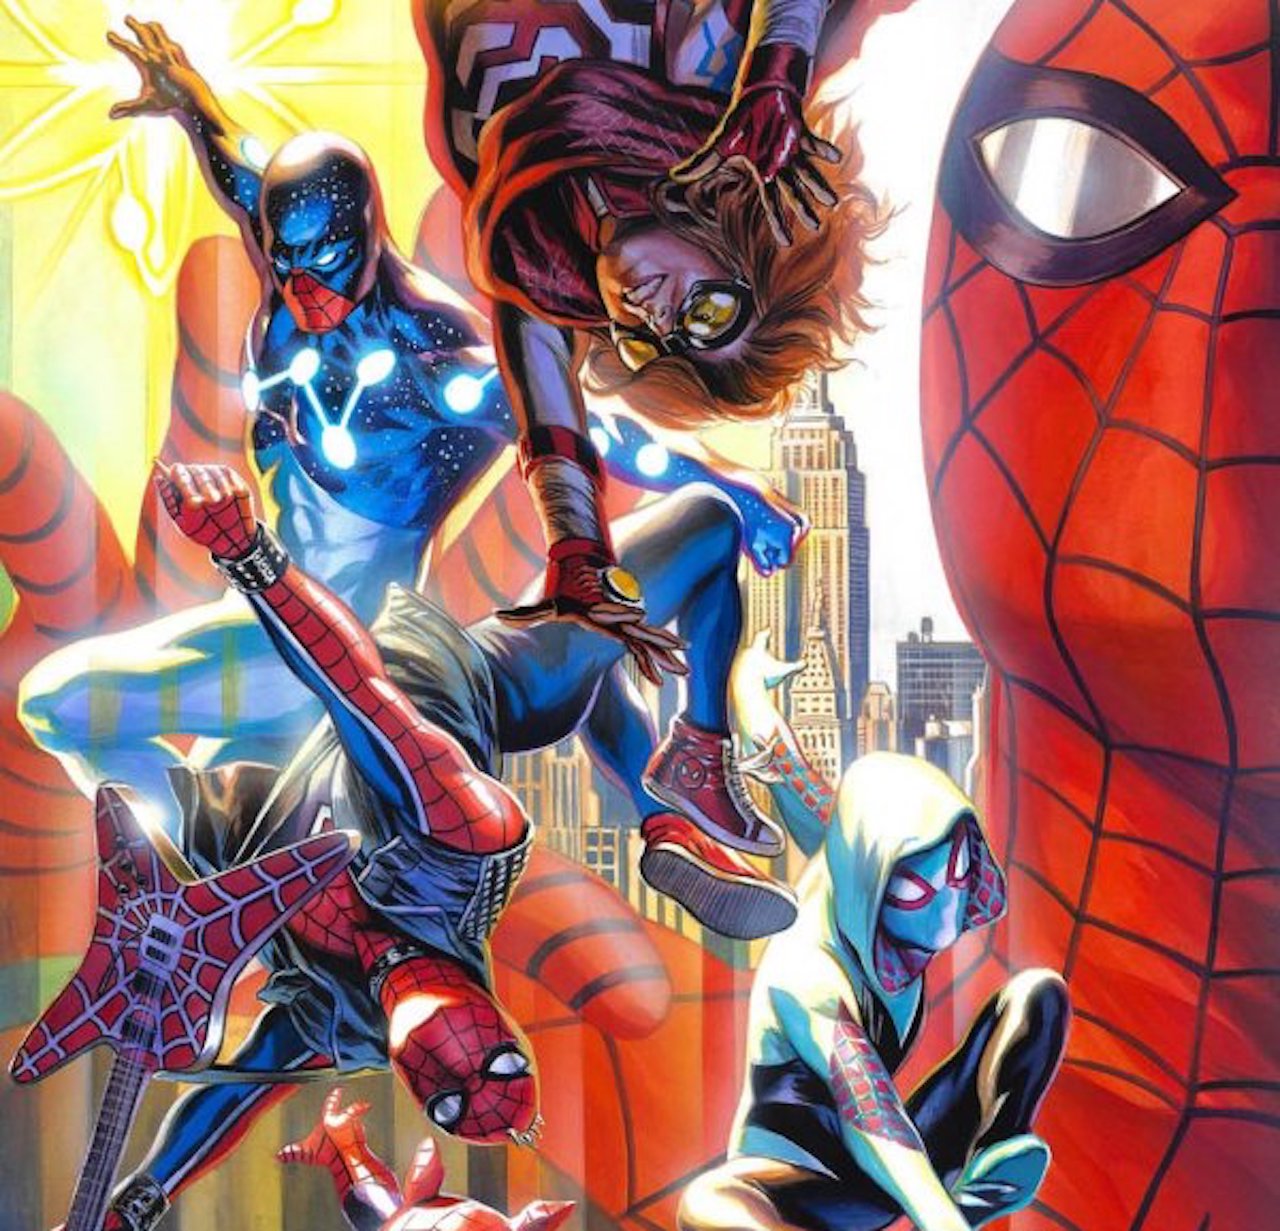 'Spider-Man' #1 flips the script on Spider-Verse with death and twists